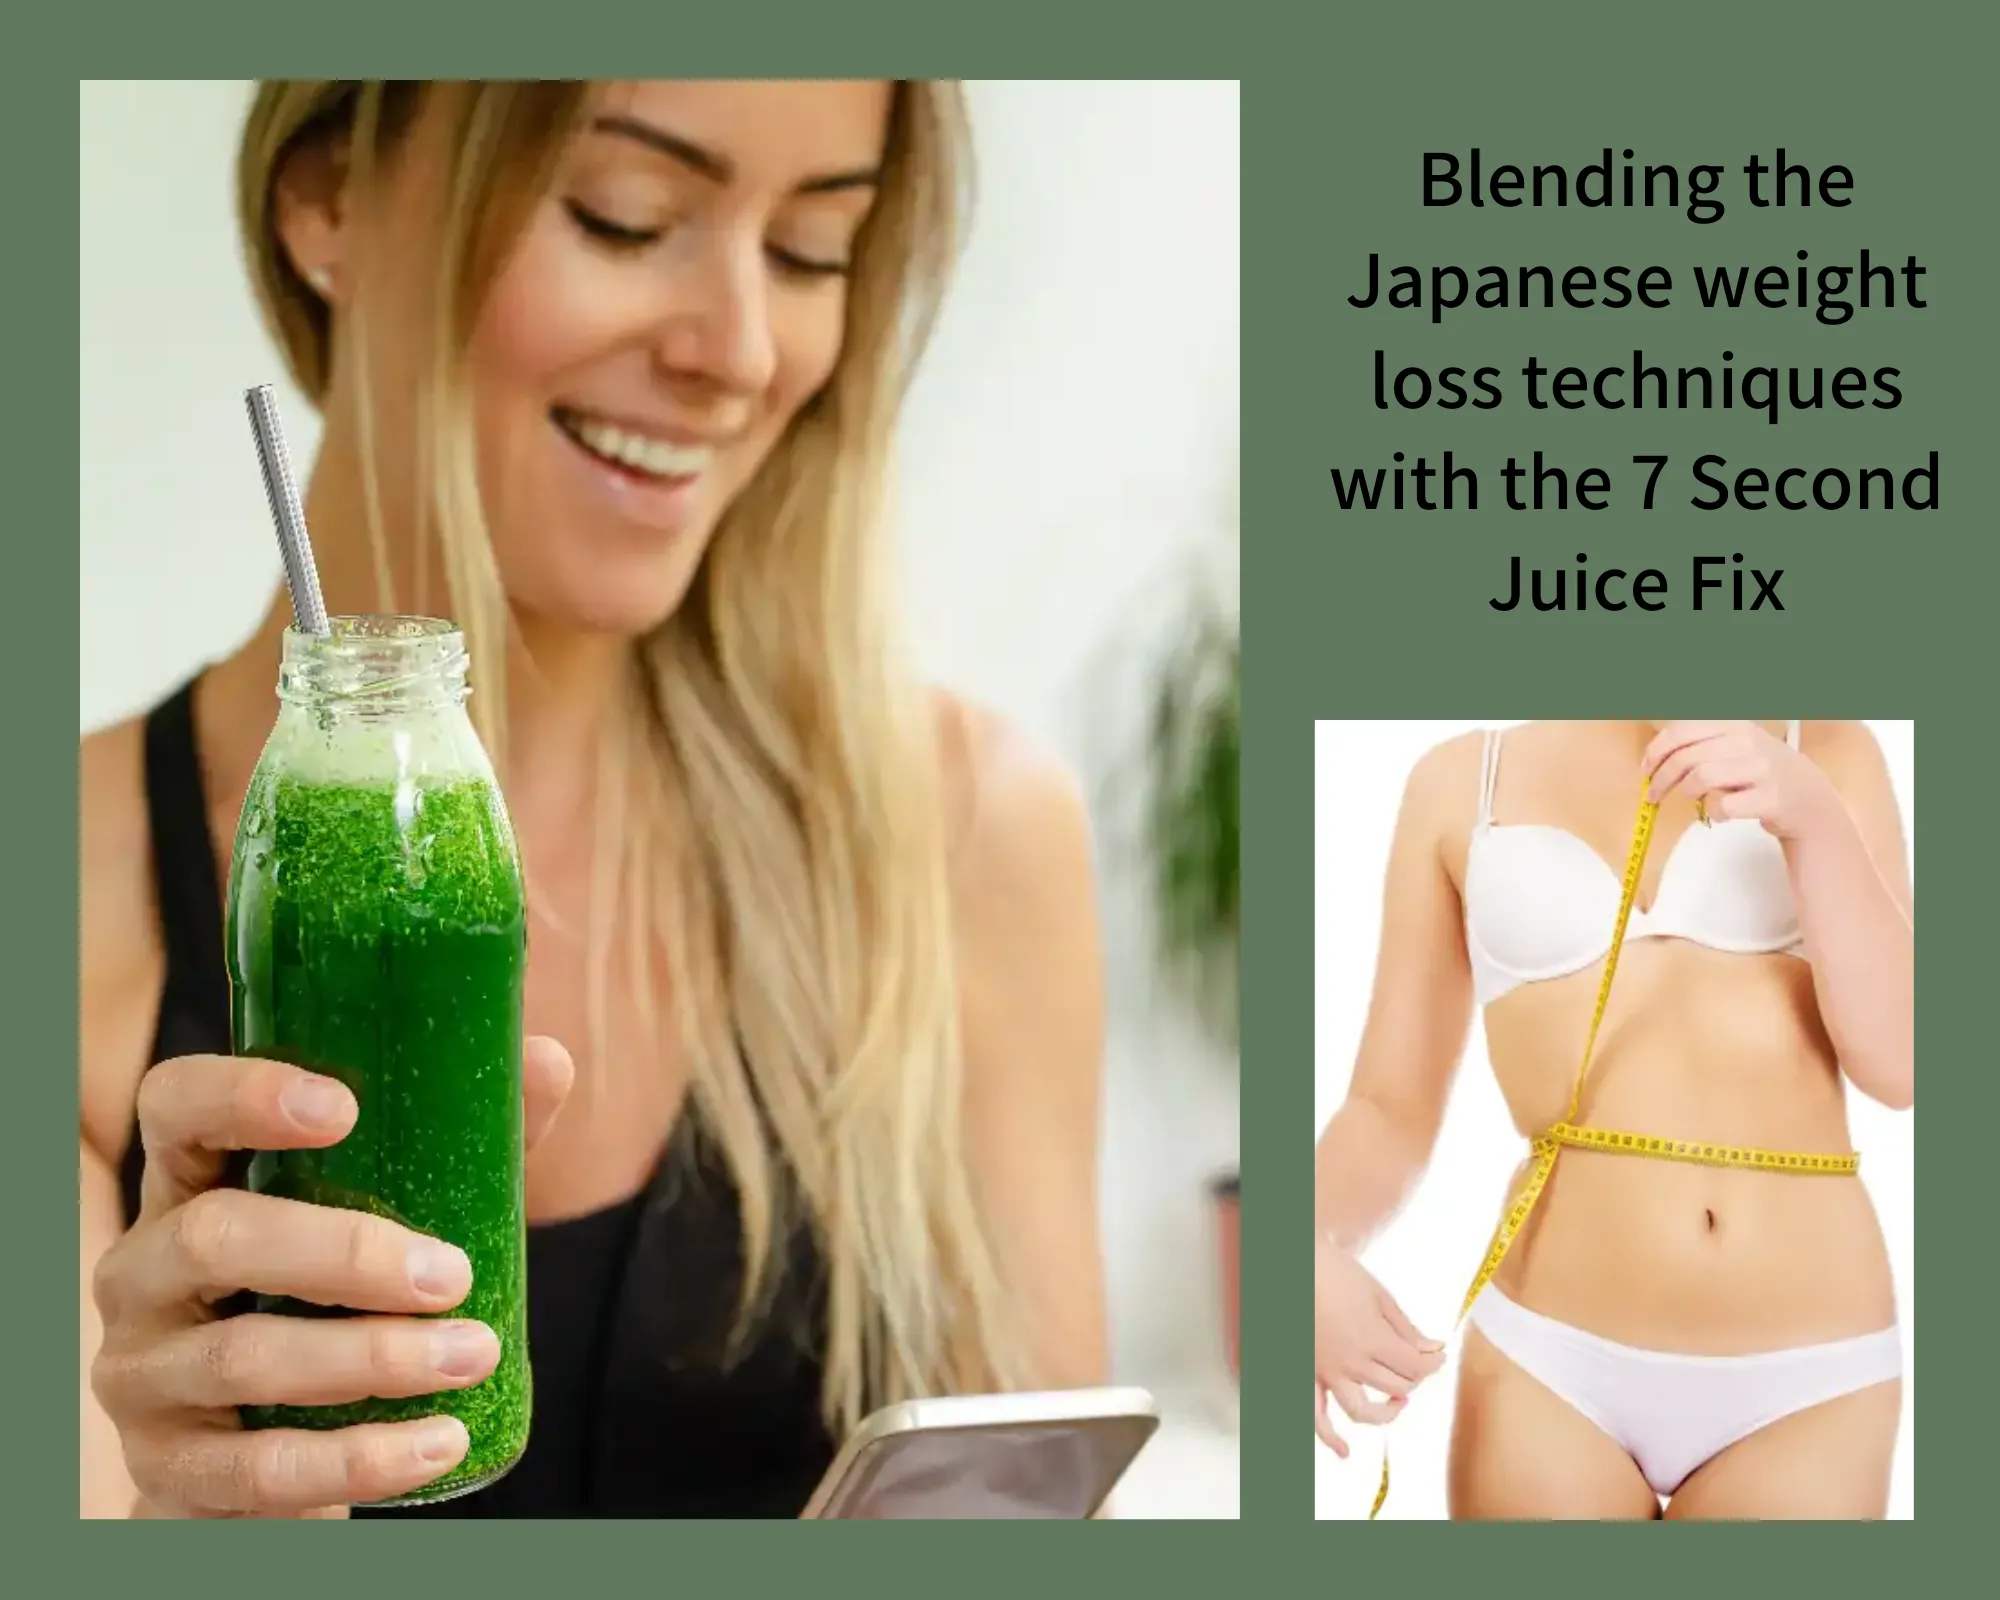 Blending the Japanese weight loss techniques with the 7 Second Juice Fix